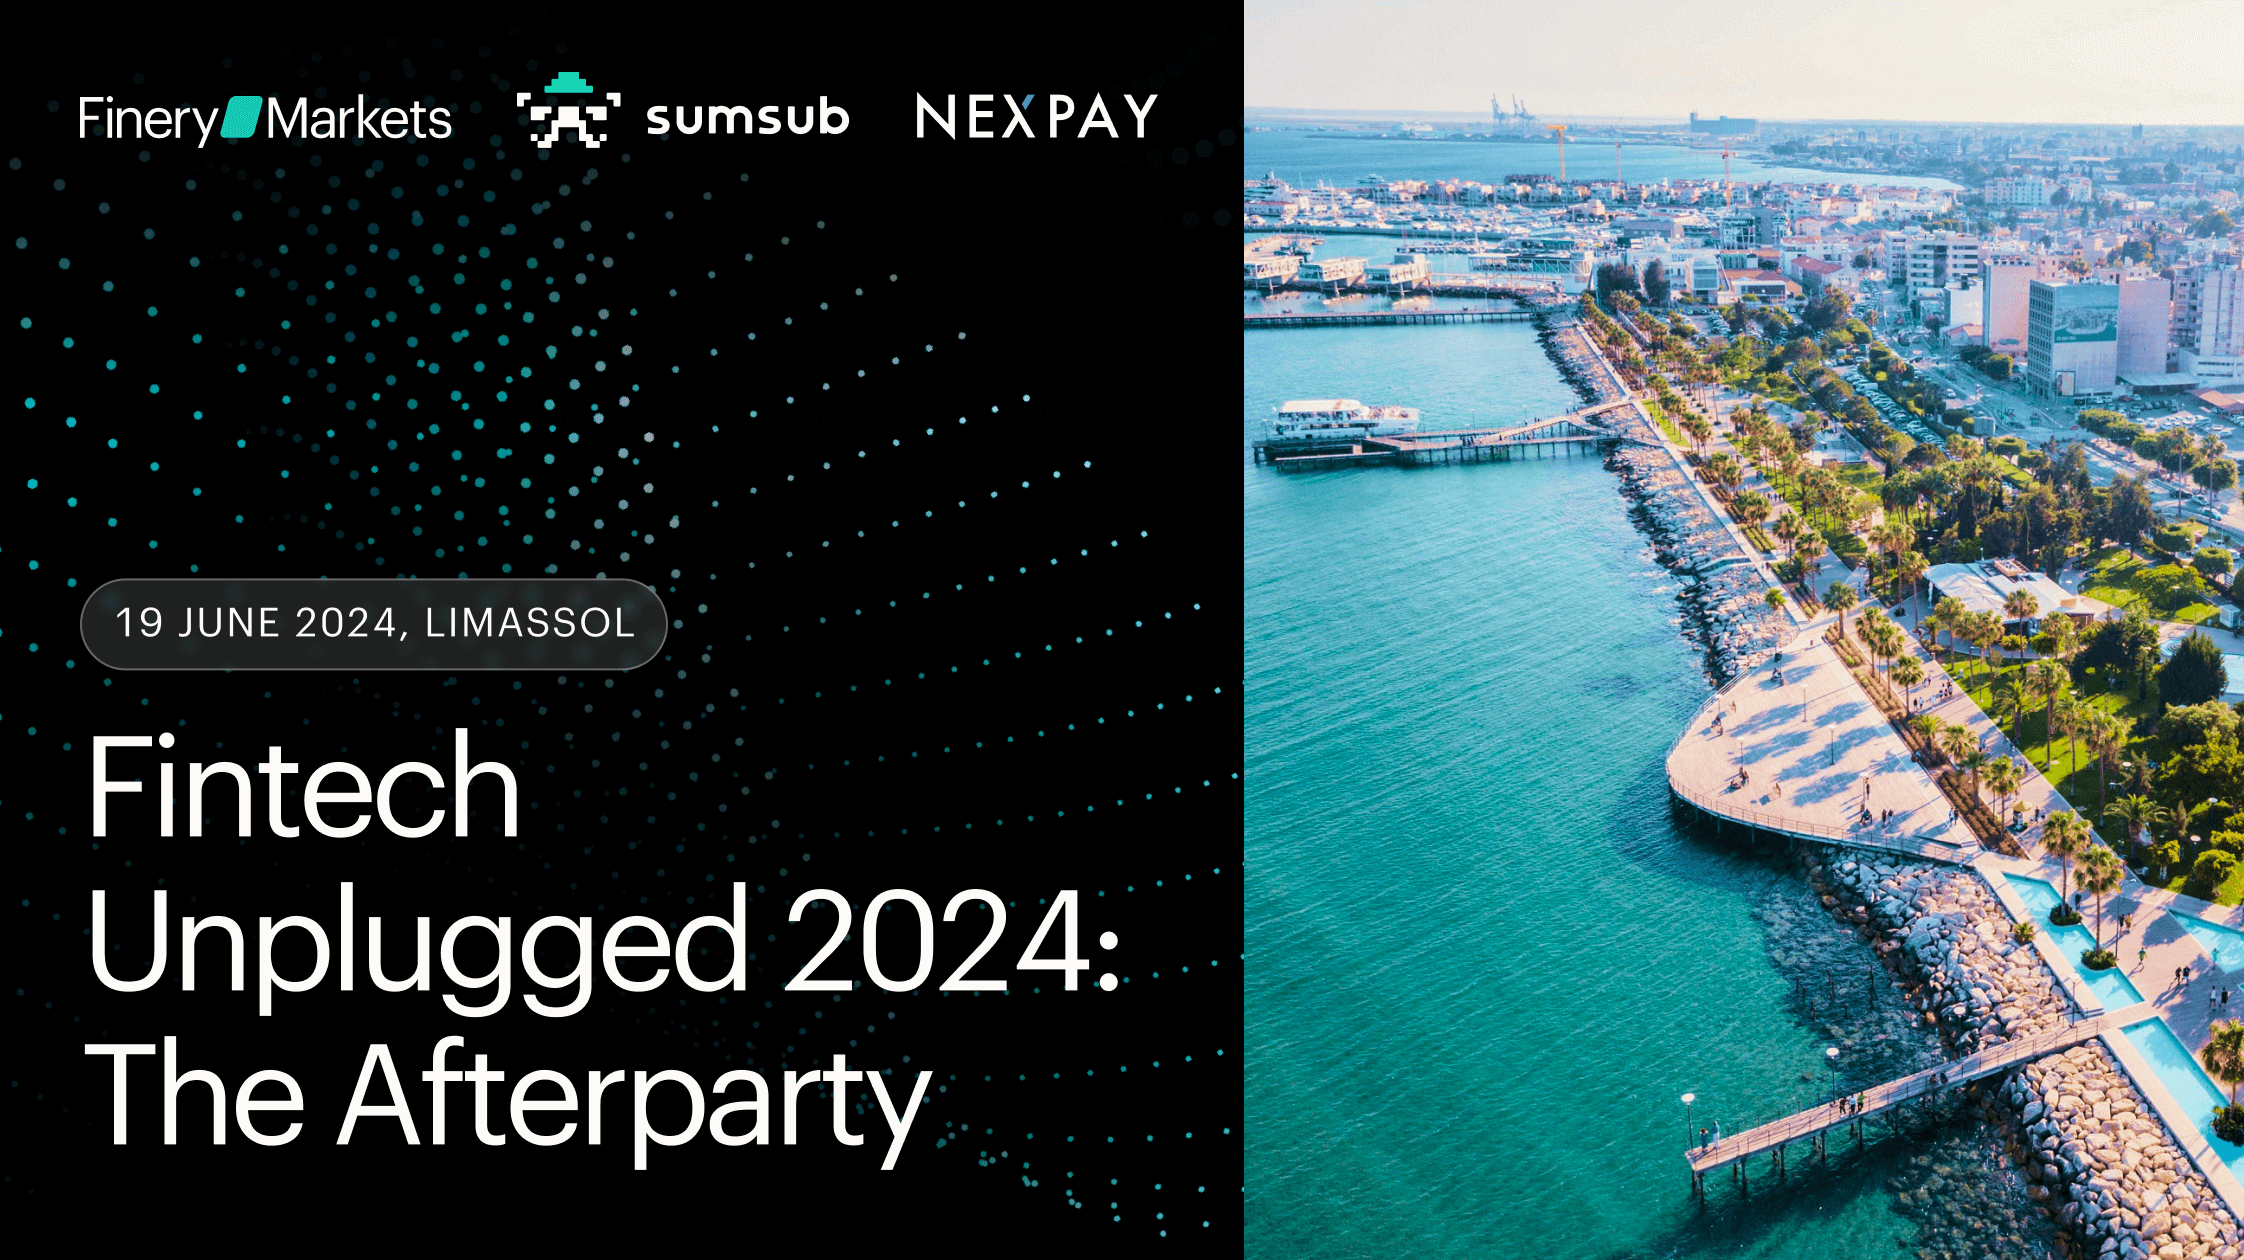 Fintech Unplugged 2024: The Afterparty